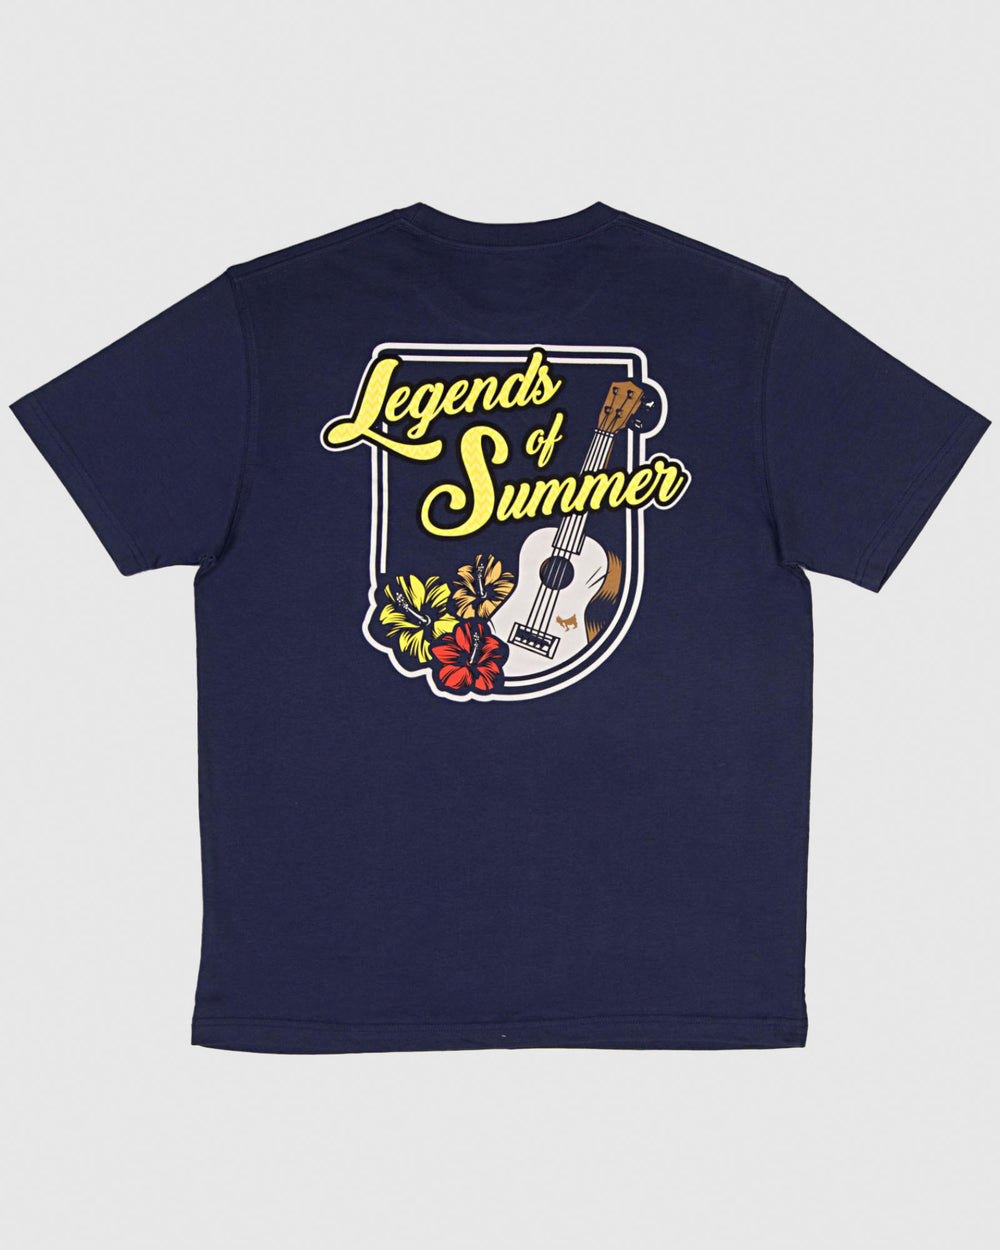 Navy t-shirt with guitar and floral design